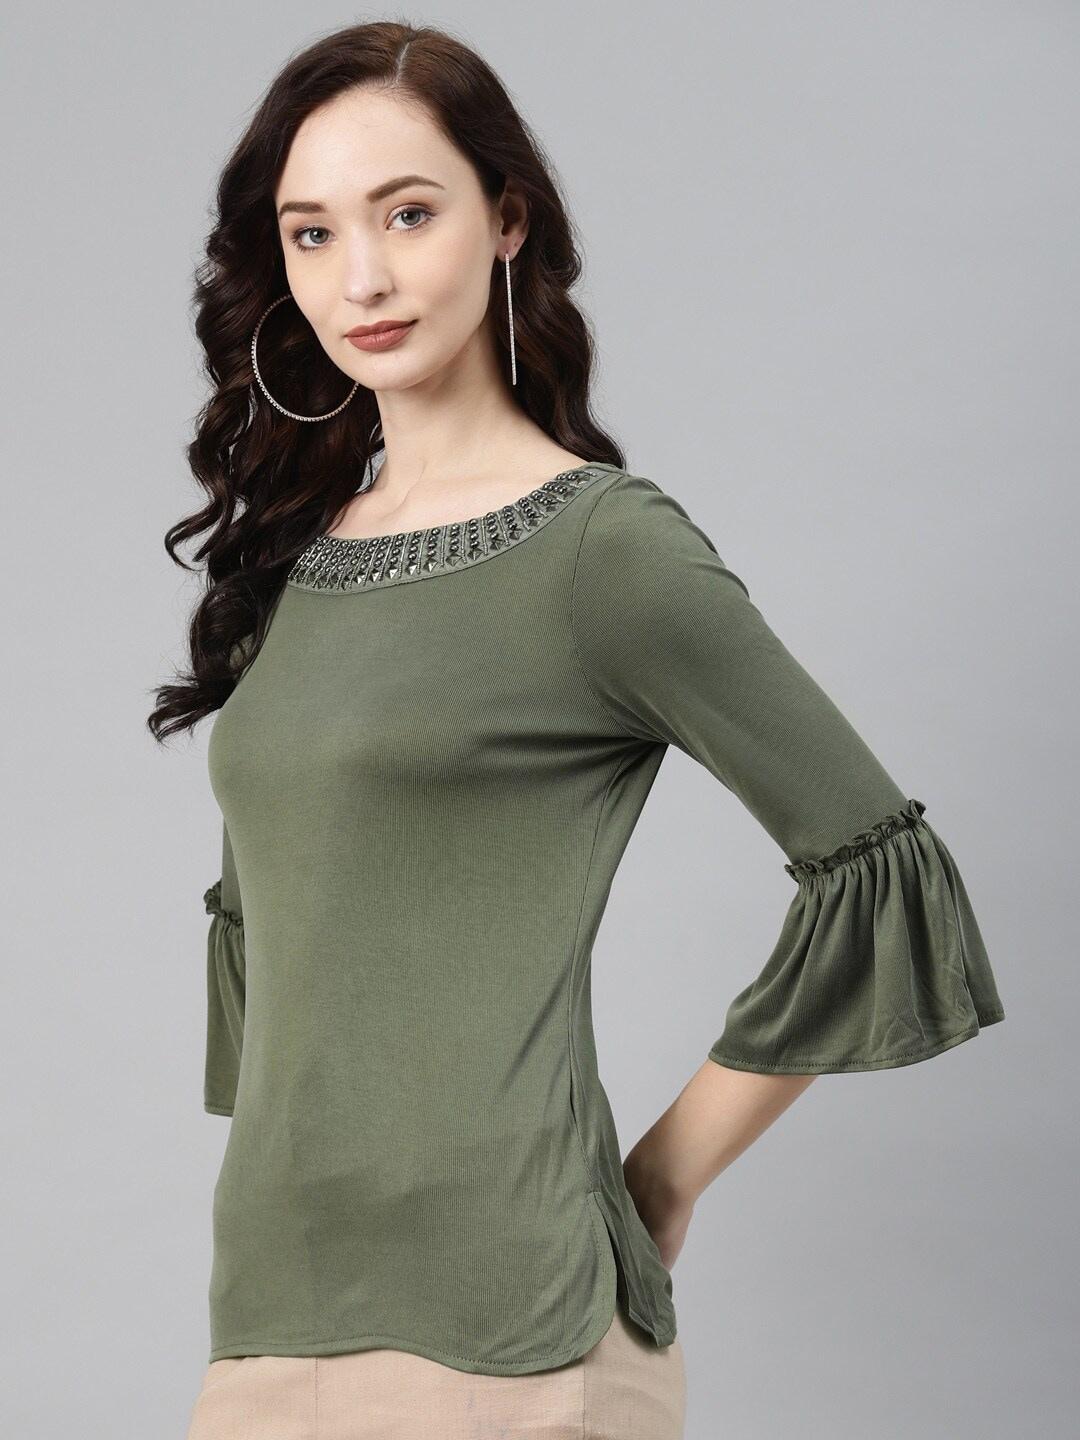 Nayam By Lakshita Boat Neck Bell Sleeves Studded Top